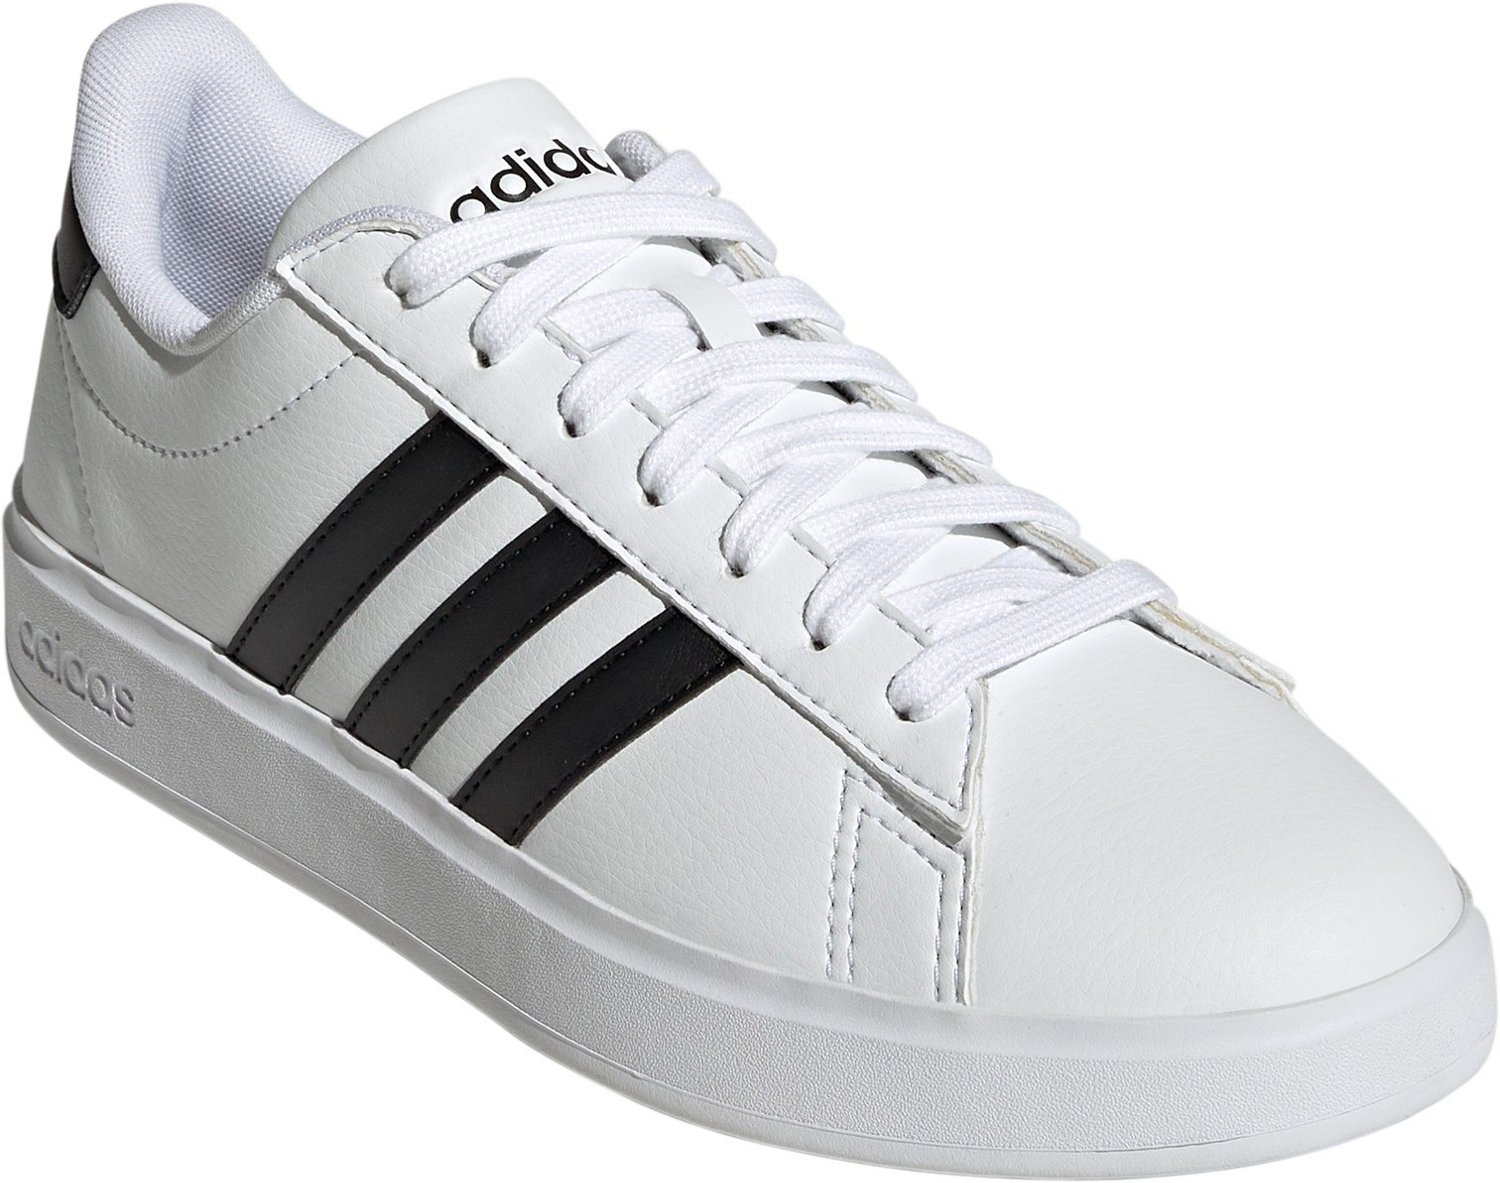 adidas Women’s Grand Court 2.0 Shoes | Free Shipping at Academy